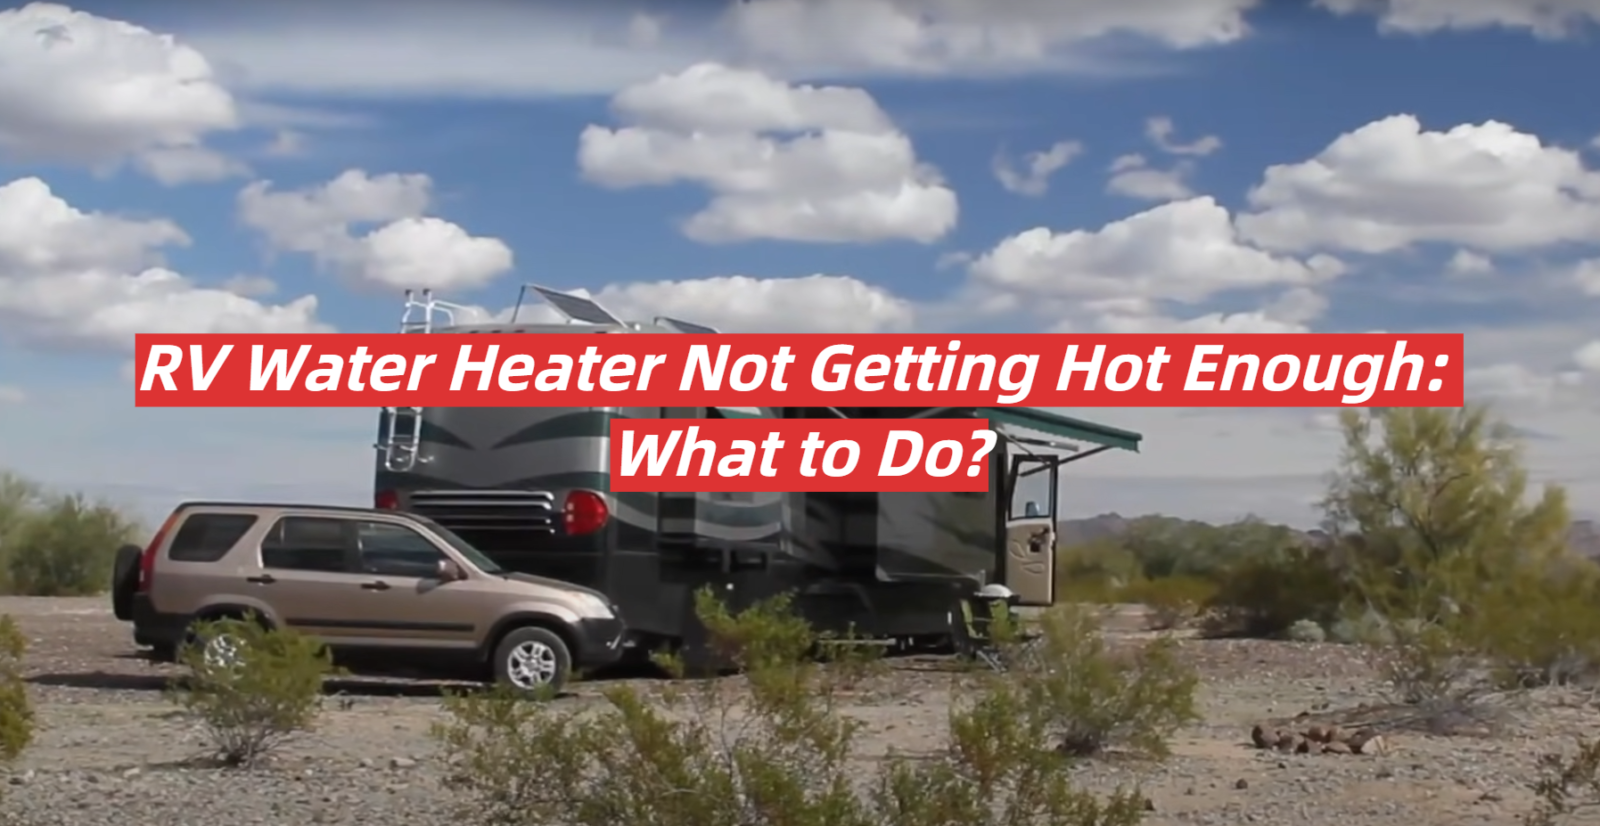 RV Water Heater Not Getting Hot Enough: What to Do?